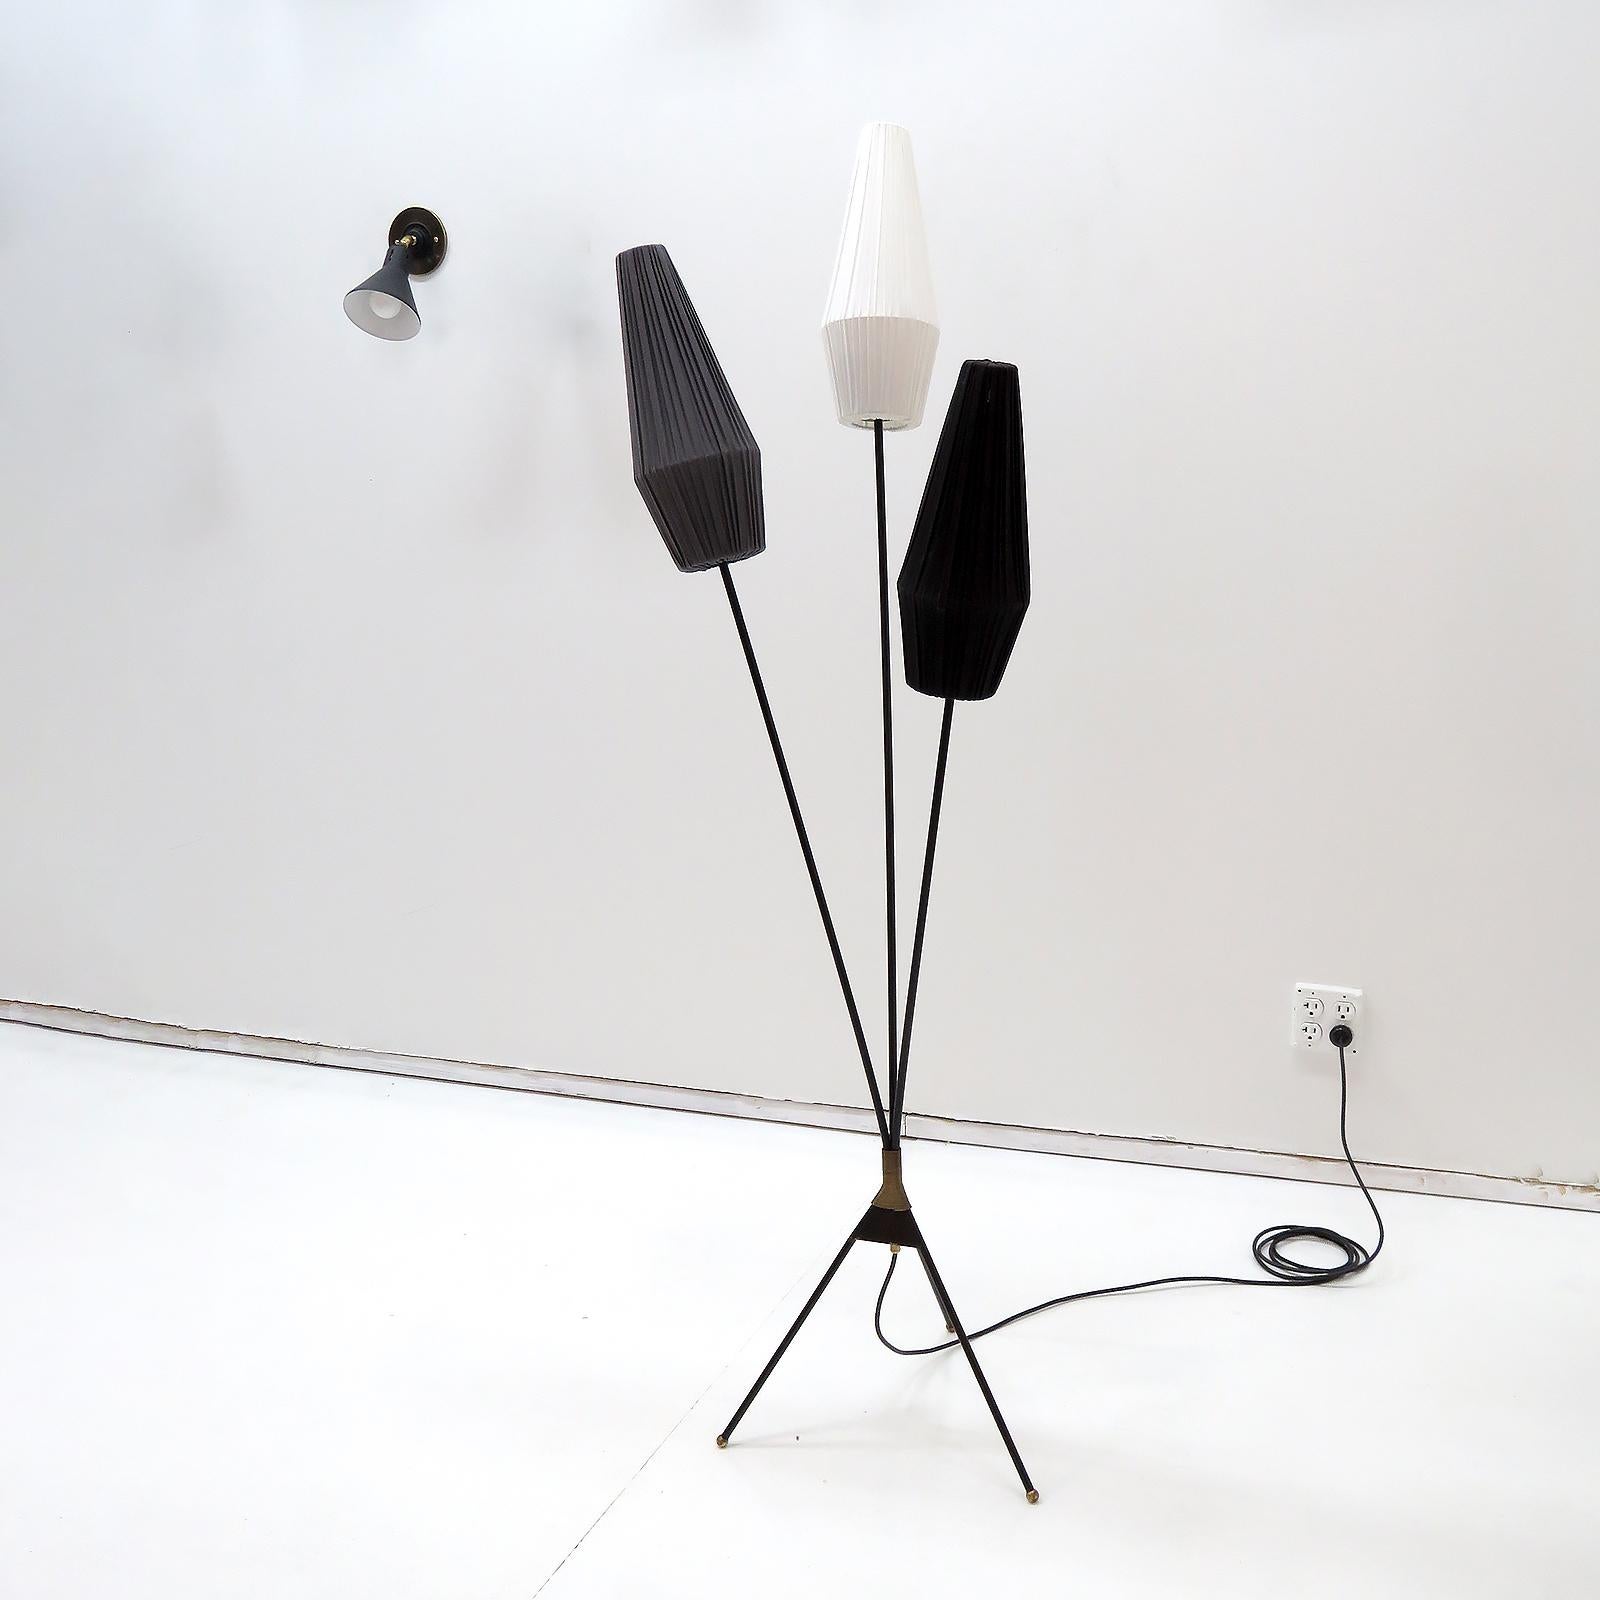 Wonderful 1950s Swedish tripod floor lamp, 1950, in black enamel with brass accents, with three tricolored fabric clip on shades, on/off switch at the convergence point of the three arm/legs, three E26 sockets, max. wattage 60w each, wired for US